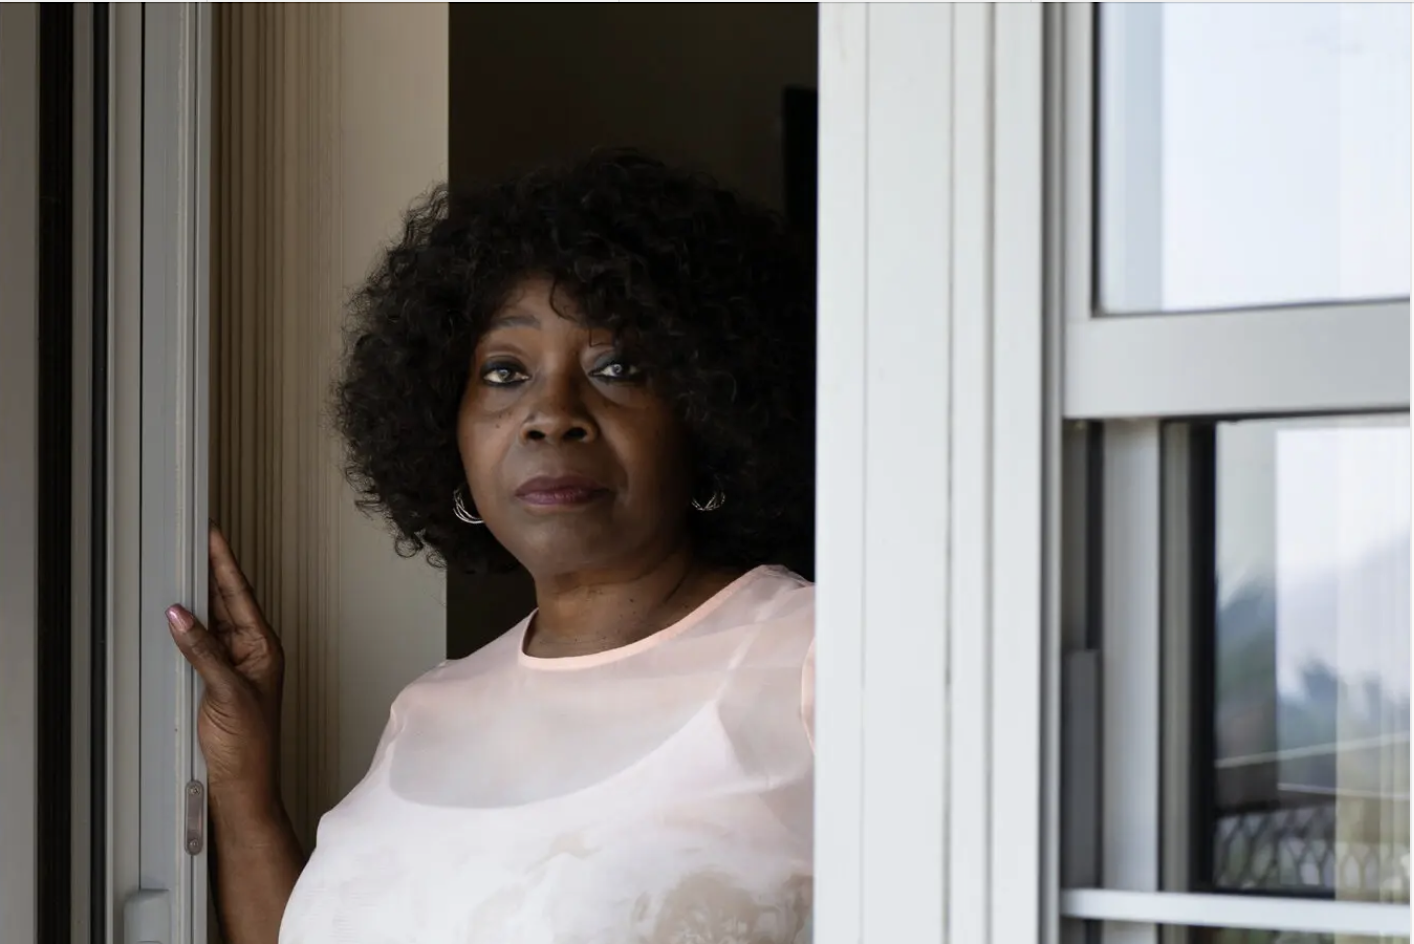 Dannette Fogle started experiencing menopause symptoms when she was 34. Her concerns were dismissed by her doctor.Credit...Maansi Srivastava/The New York Times